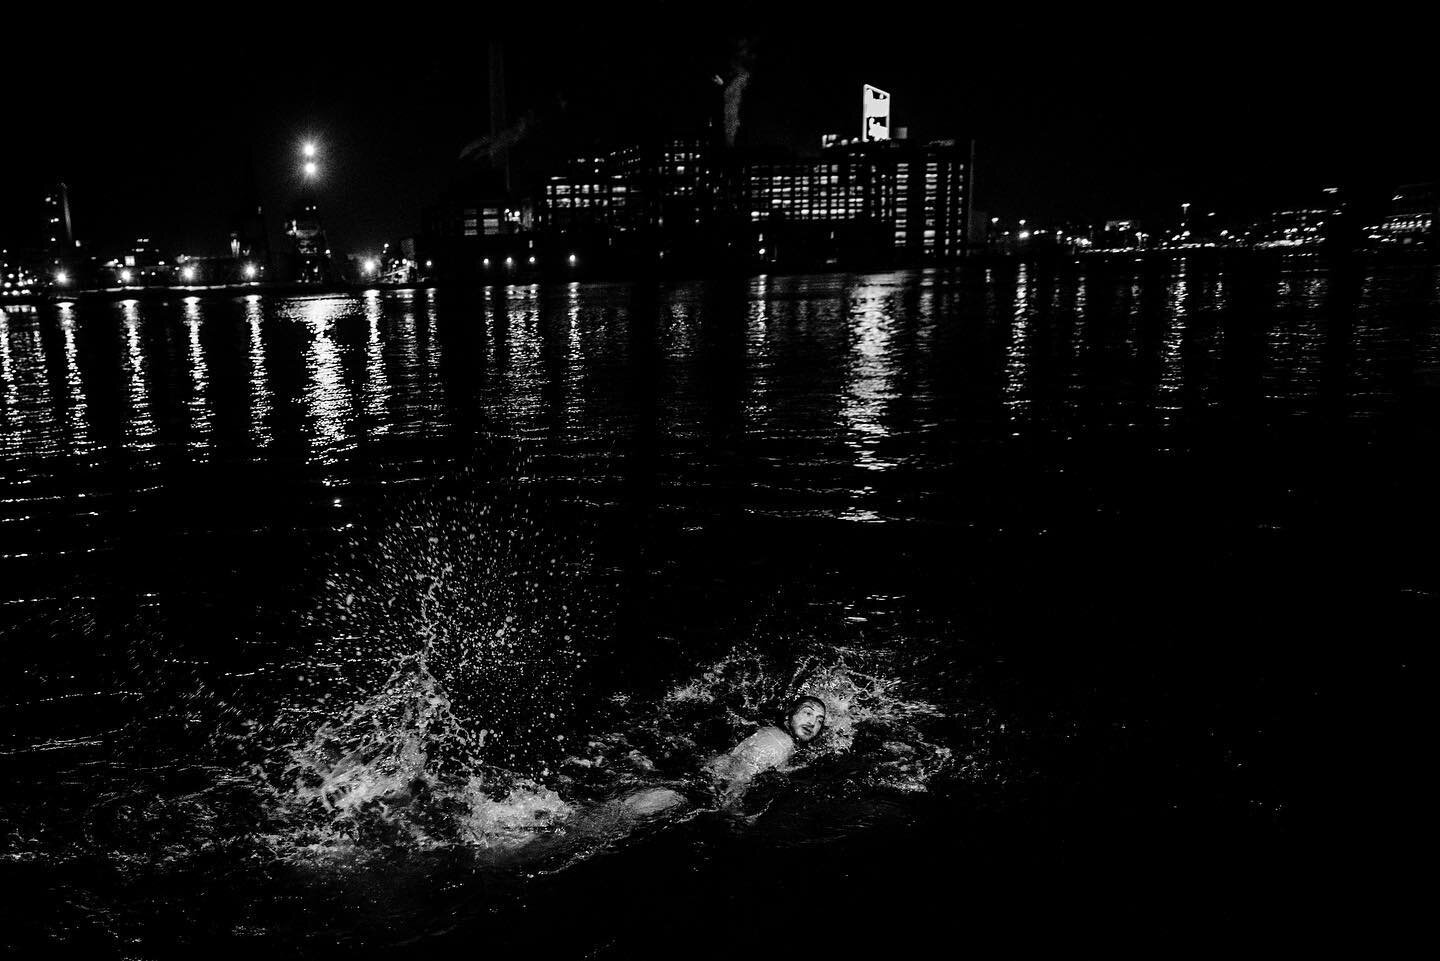 Nothing like a swim in the harbor on a hot august night&hellip;